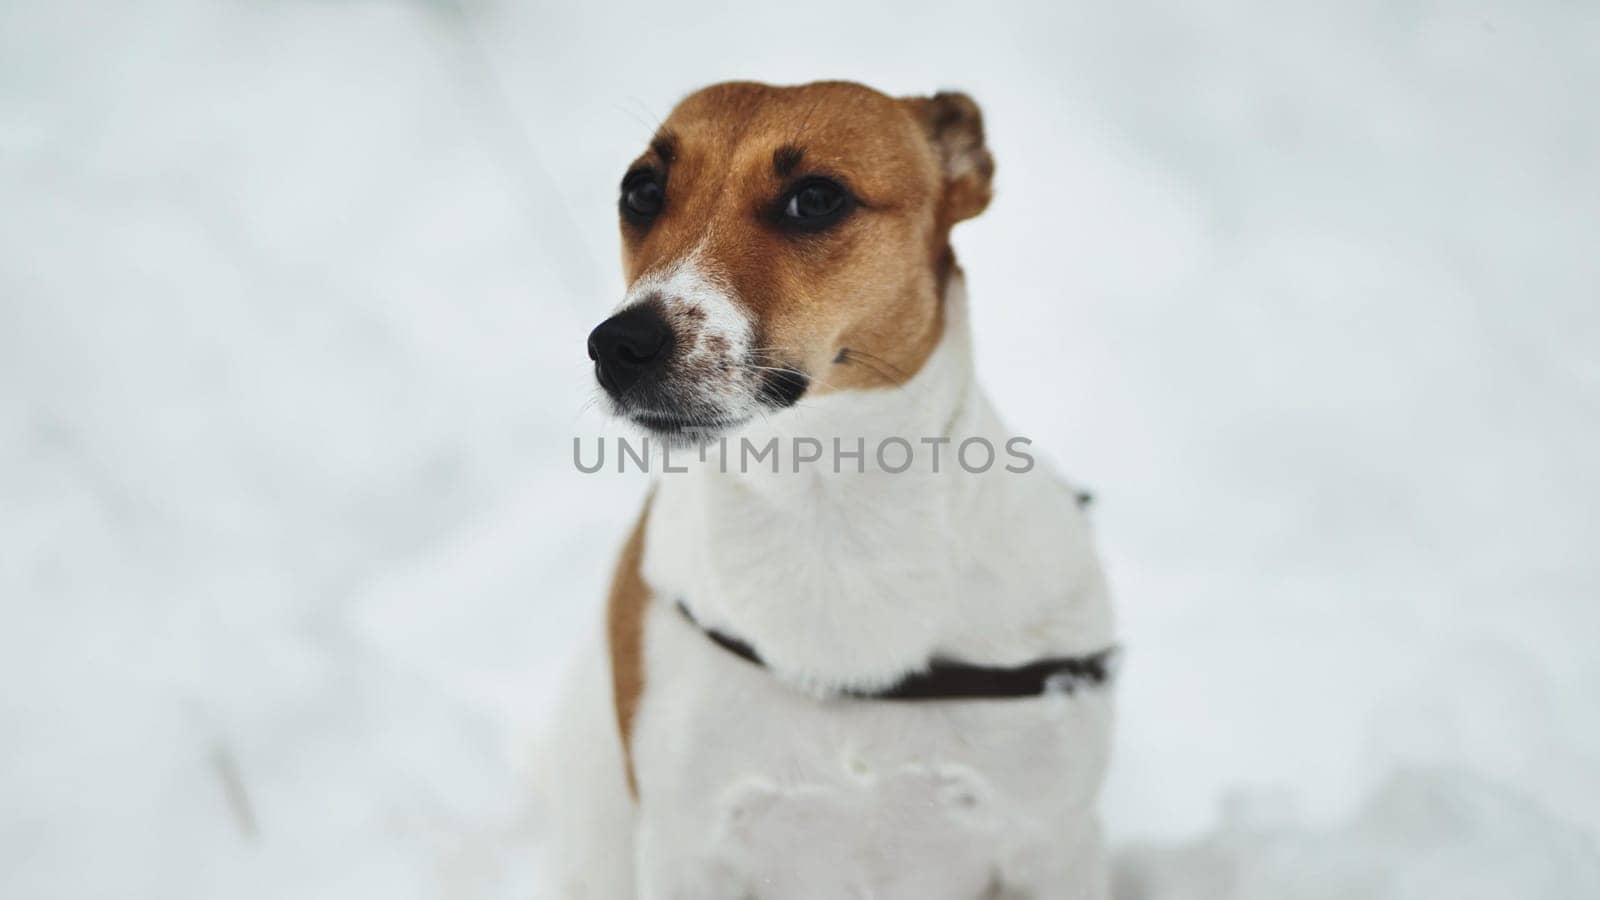 A Jack Russell Terrier trembles in the winter snow. by DovidPro